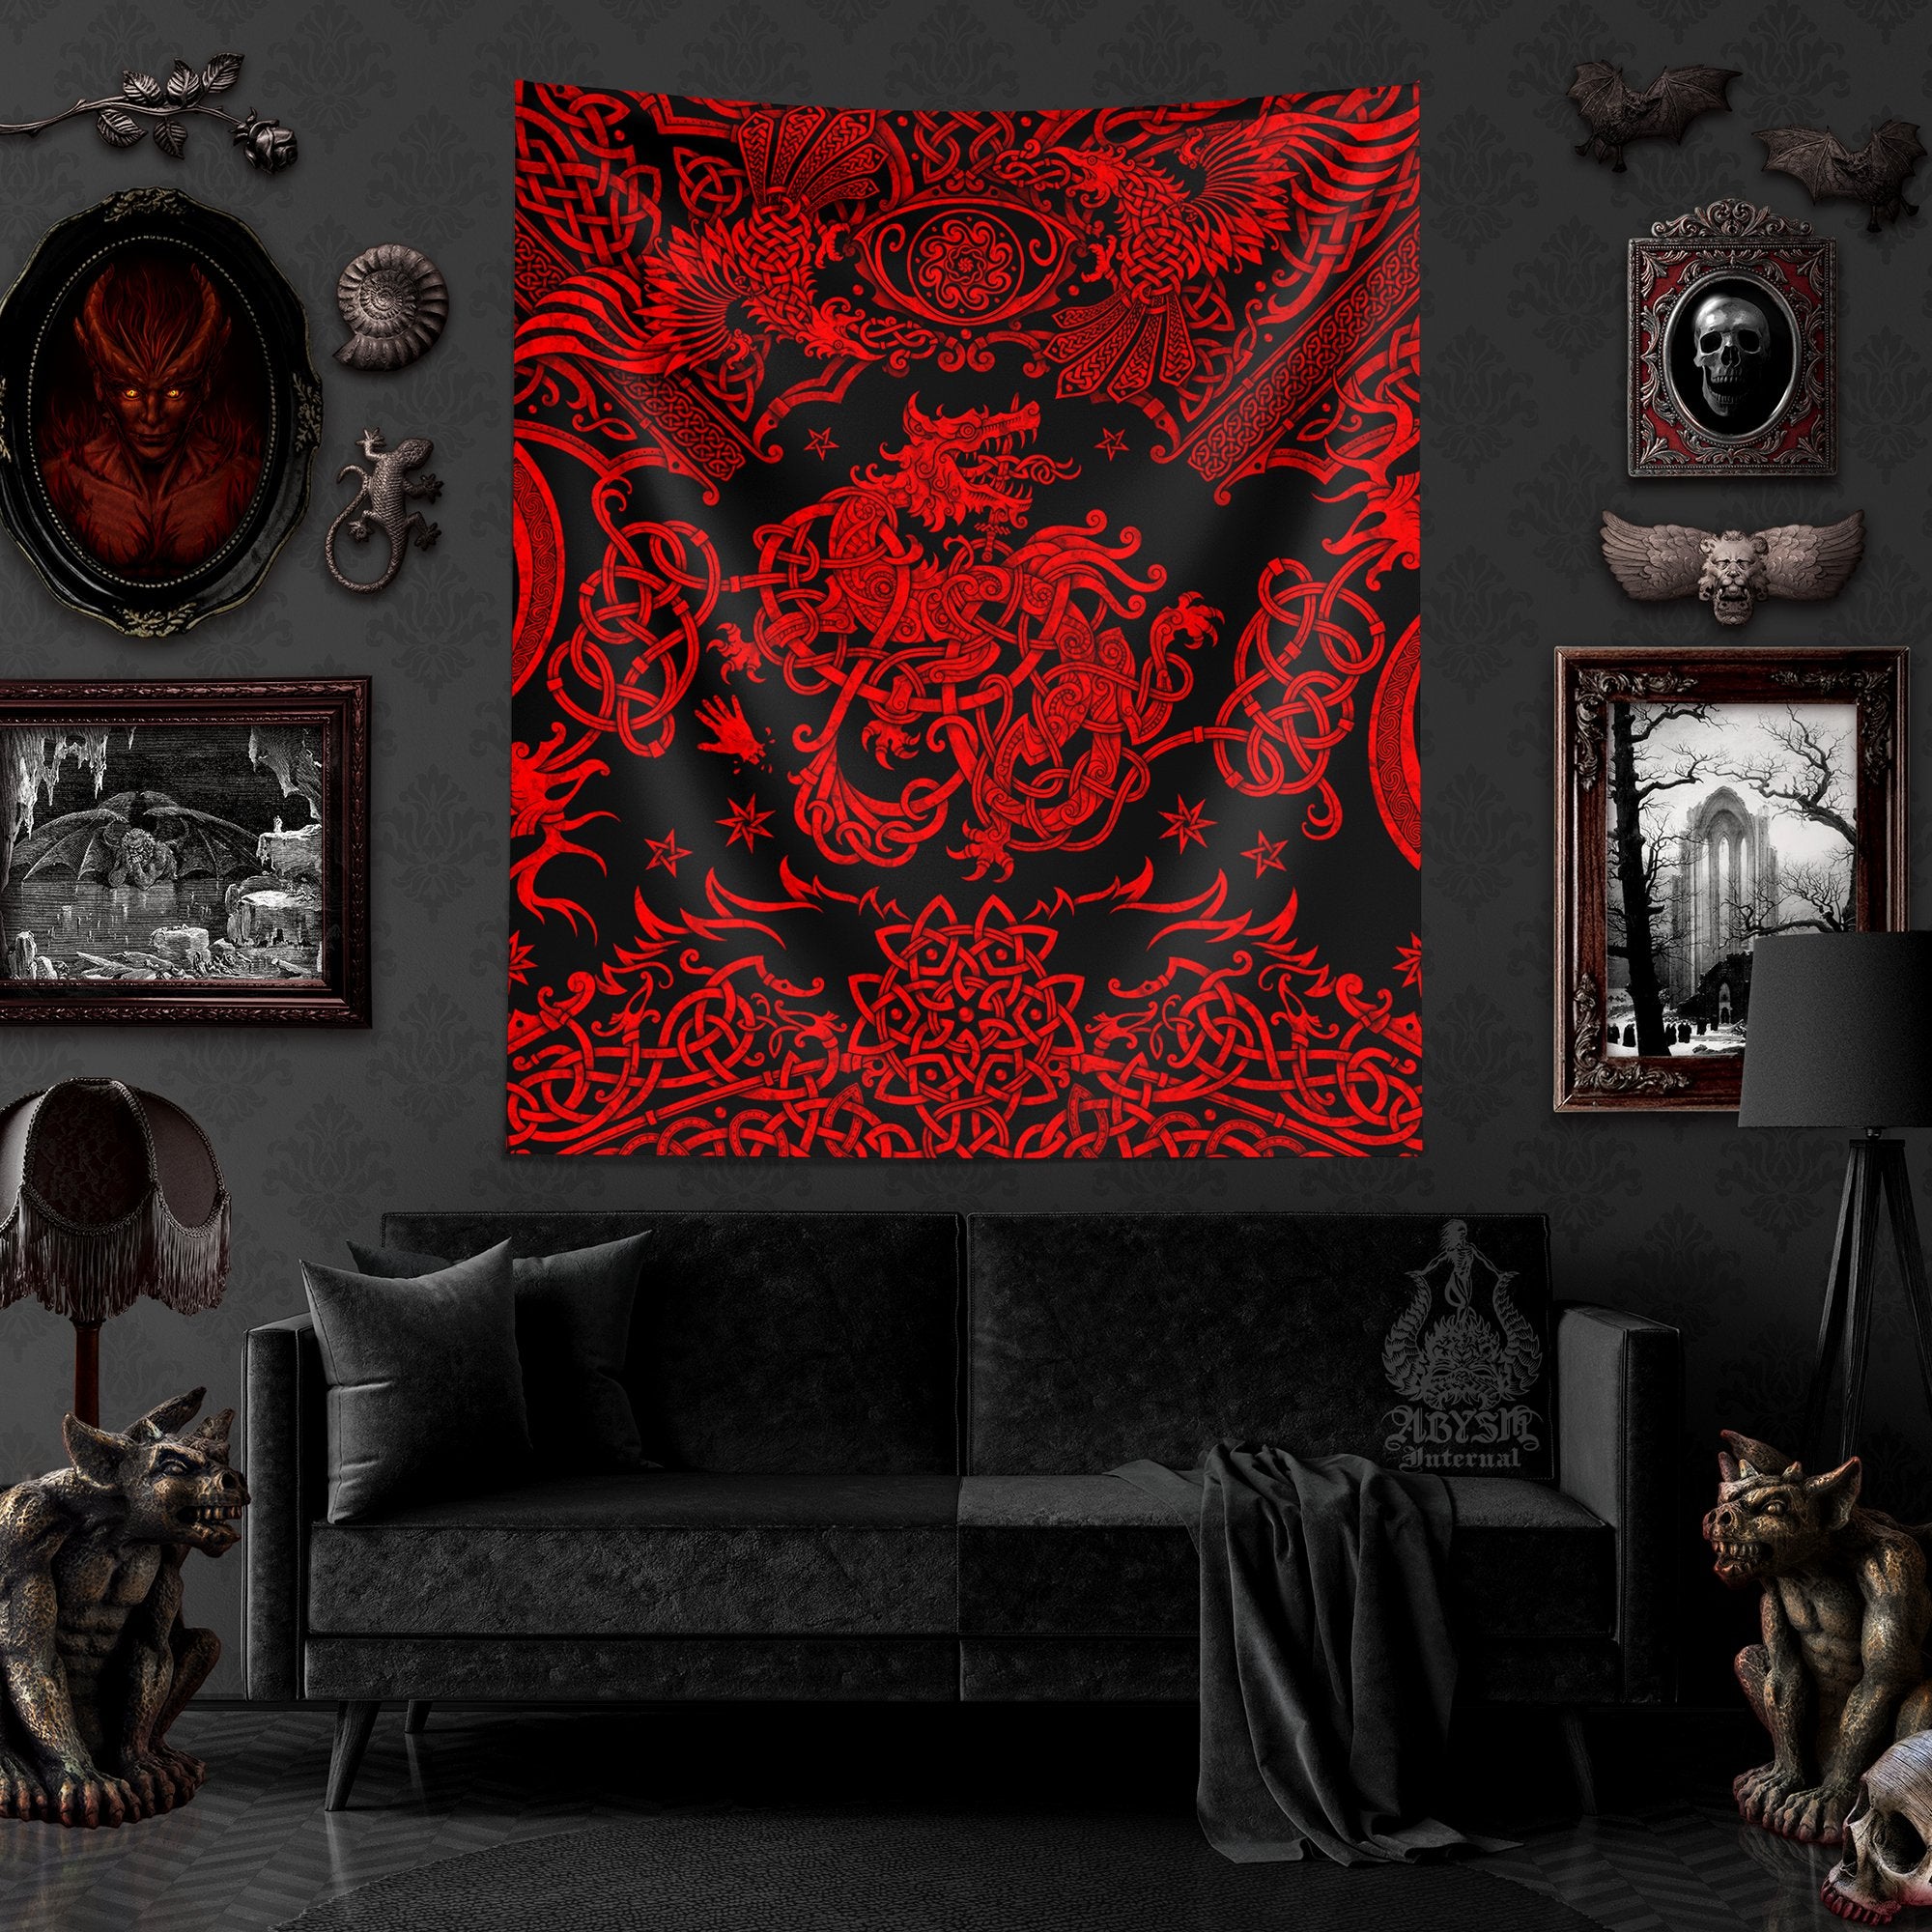 Viking Tapestry, Nordic Wall Hanging, Norse Home Decor, Fenrir Wolf Art, Vertical Print - Red Black - Abysm Internal